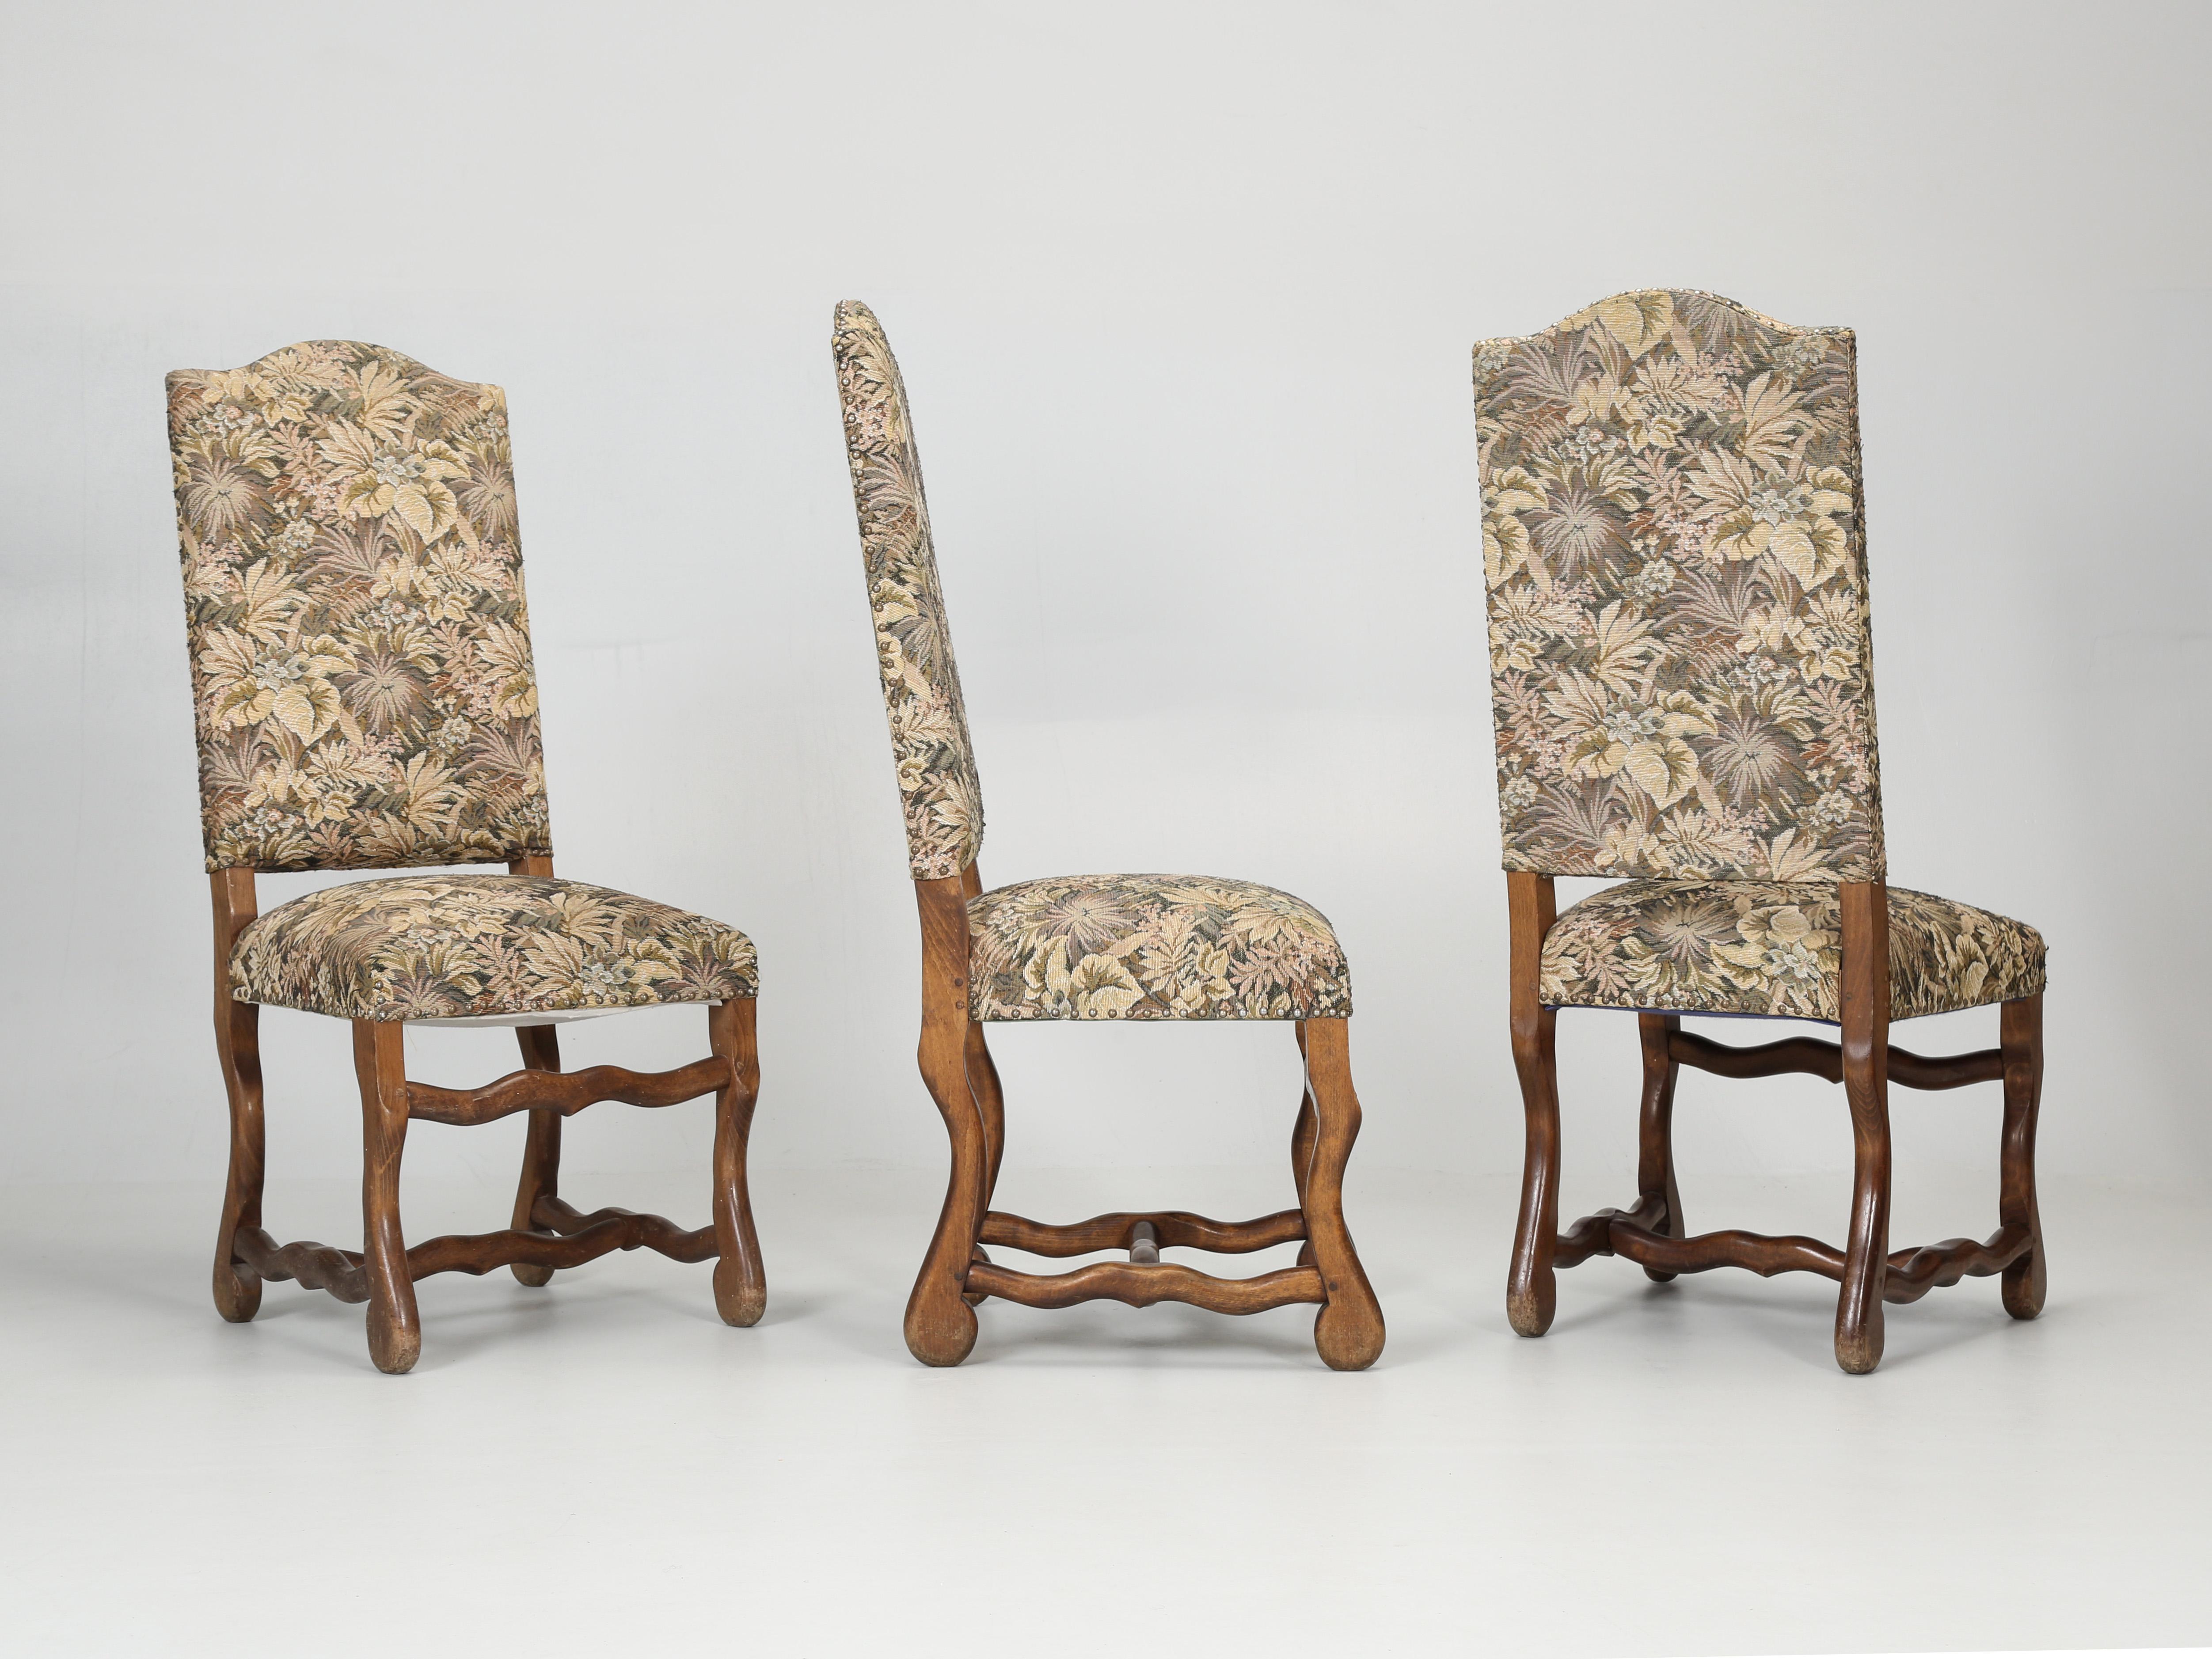 French Os De Mouton Style dining chairs in a most unusual set of (14) side chairs. This rare set of (14) antique French dining chairs were actually hand-carved and assembled with wooden pegs. That said, they are old enough to now require rebuilding